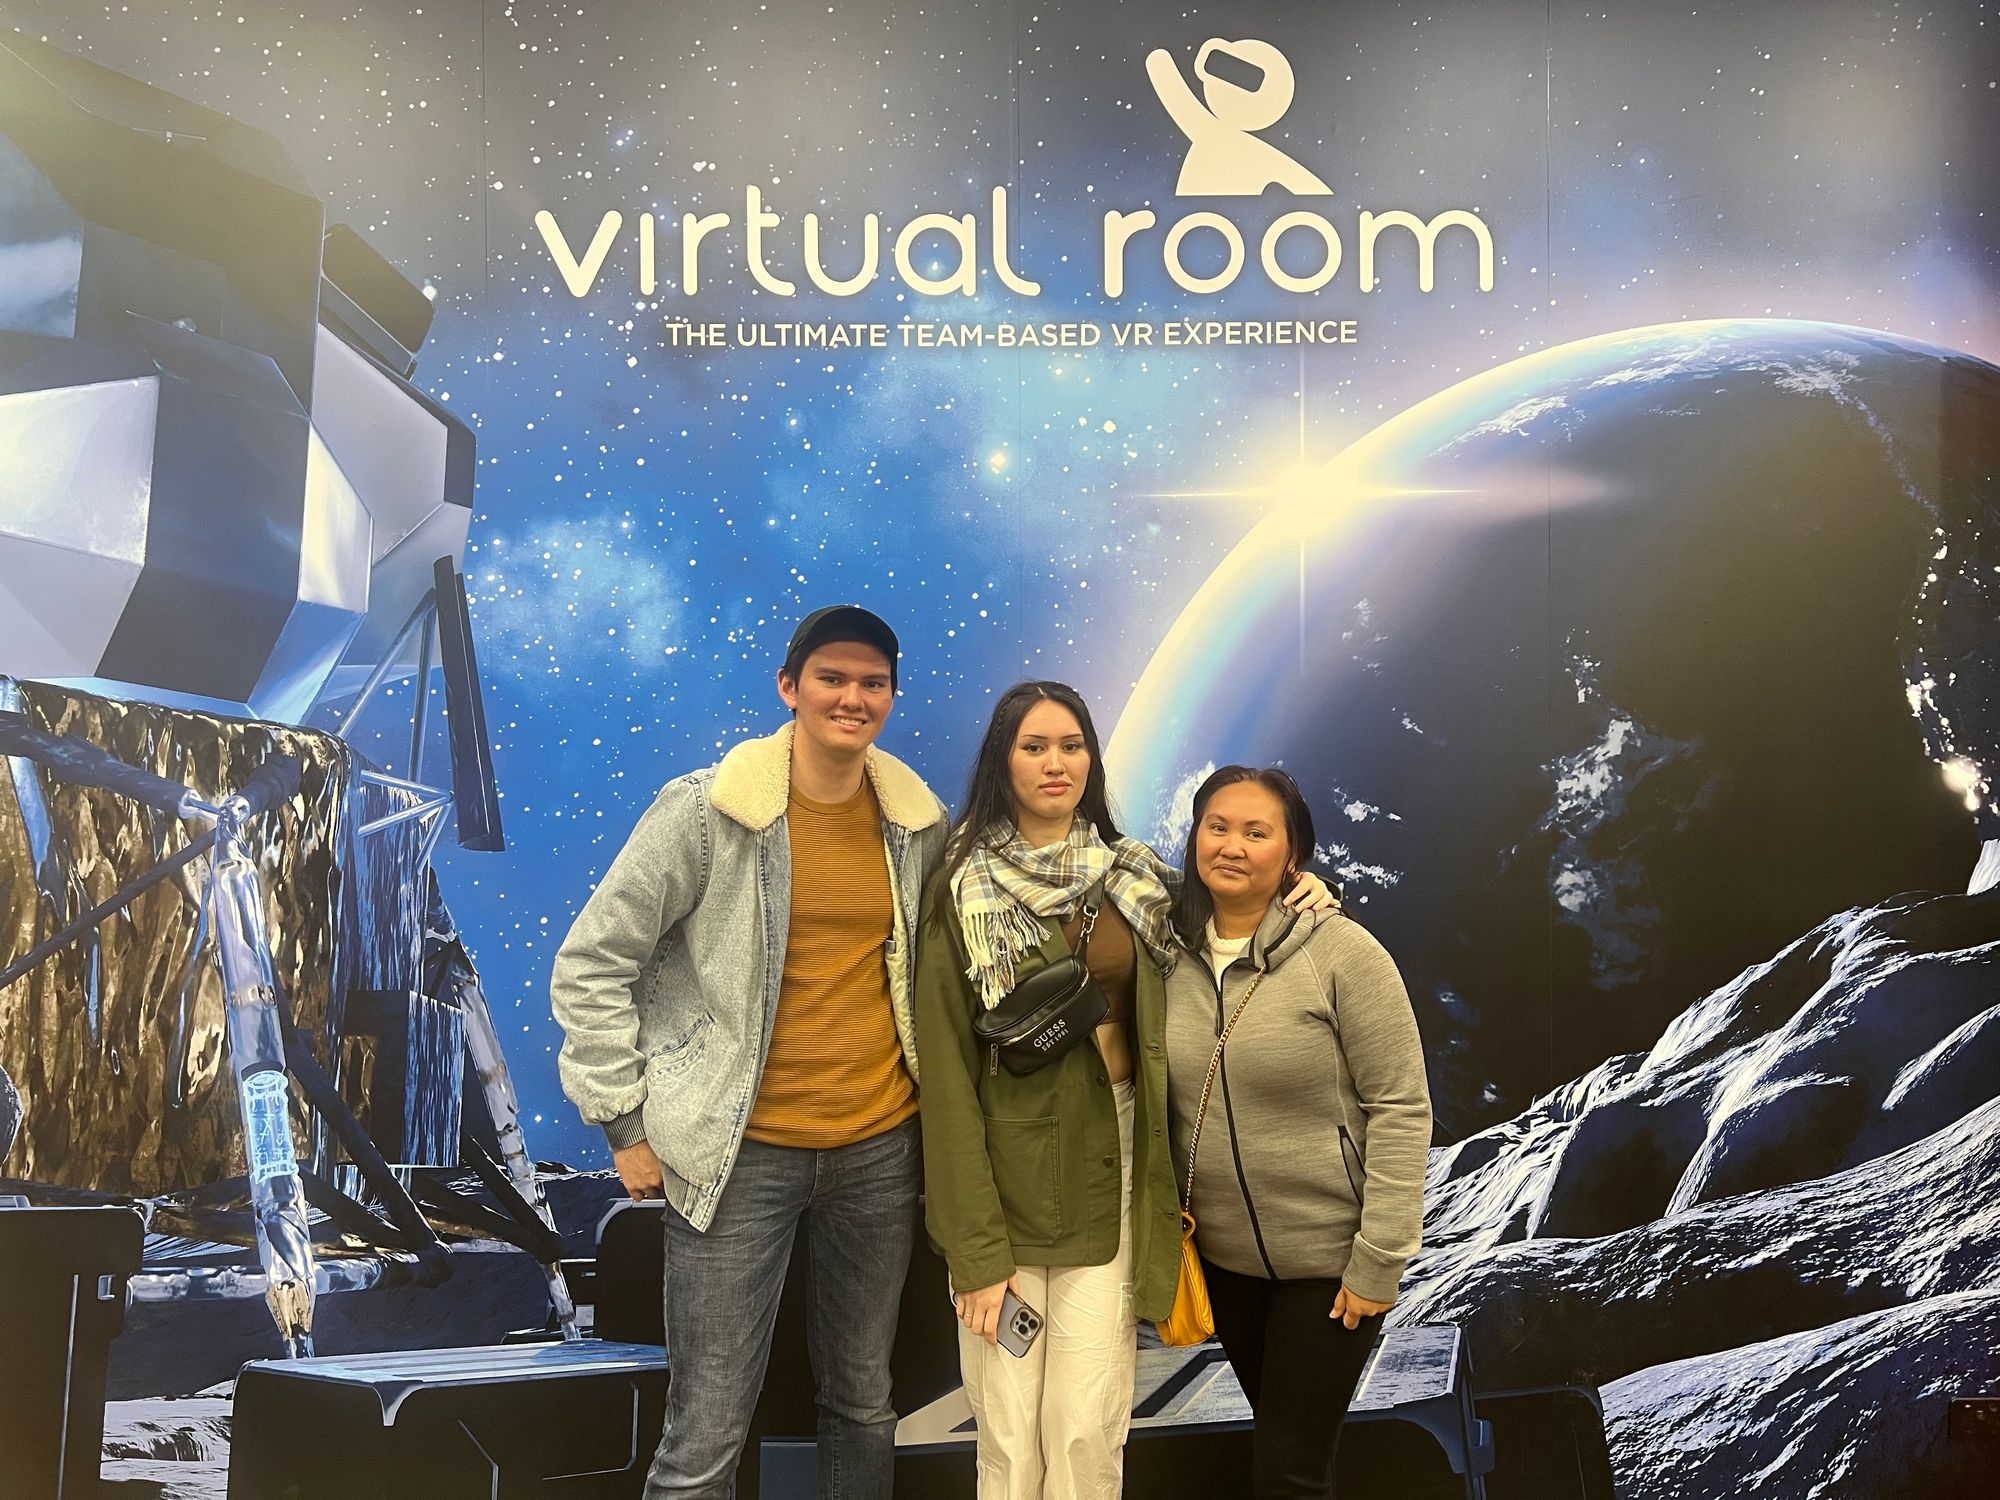 Philip and 2 women stand in front of a sign that says "virtual room"